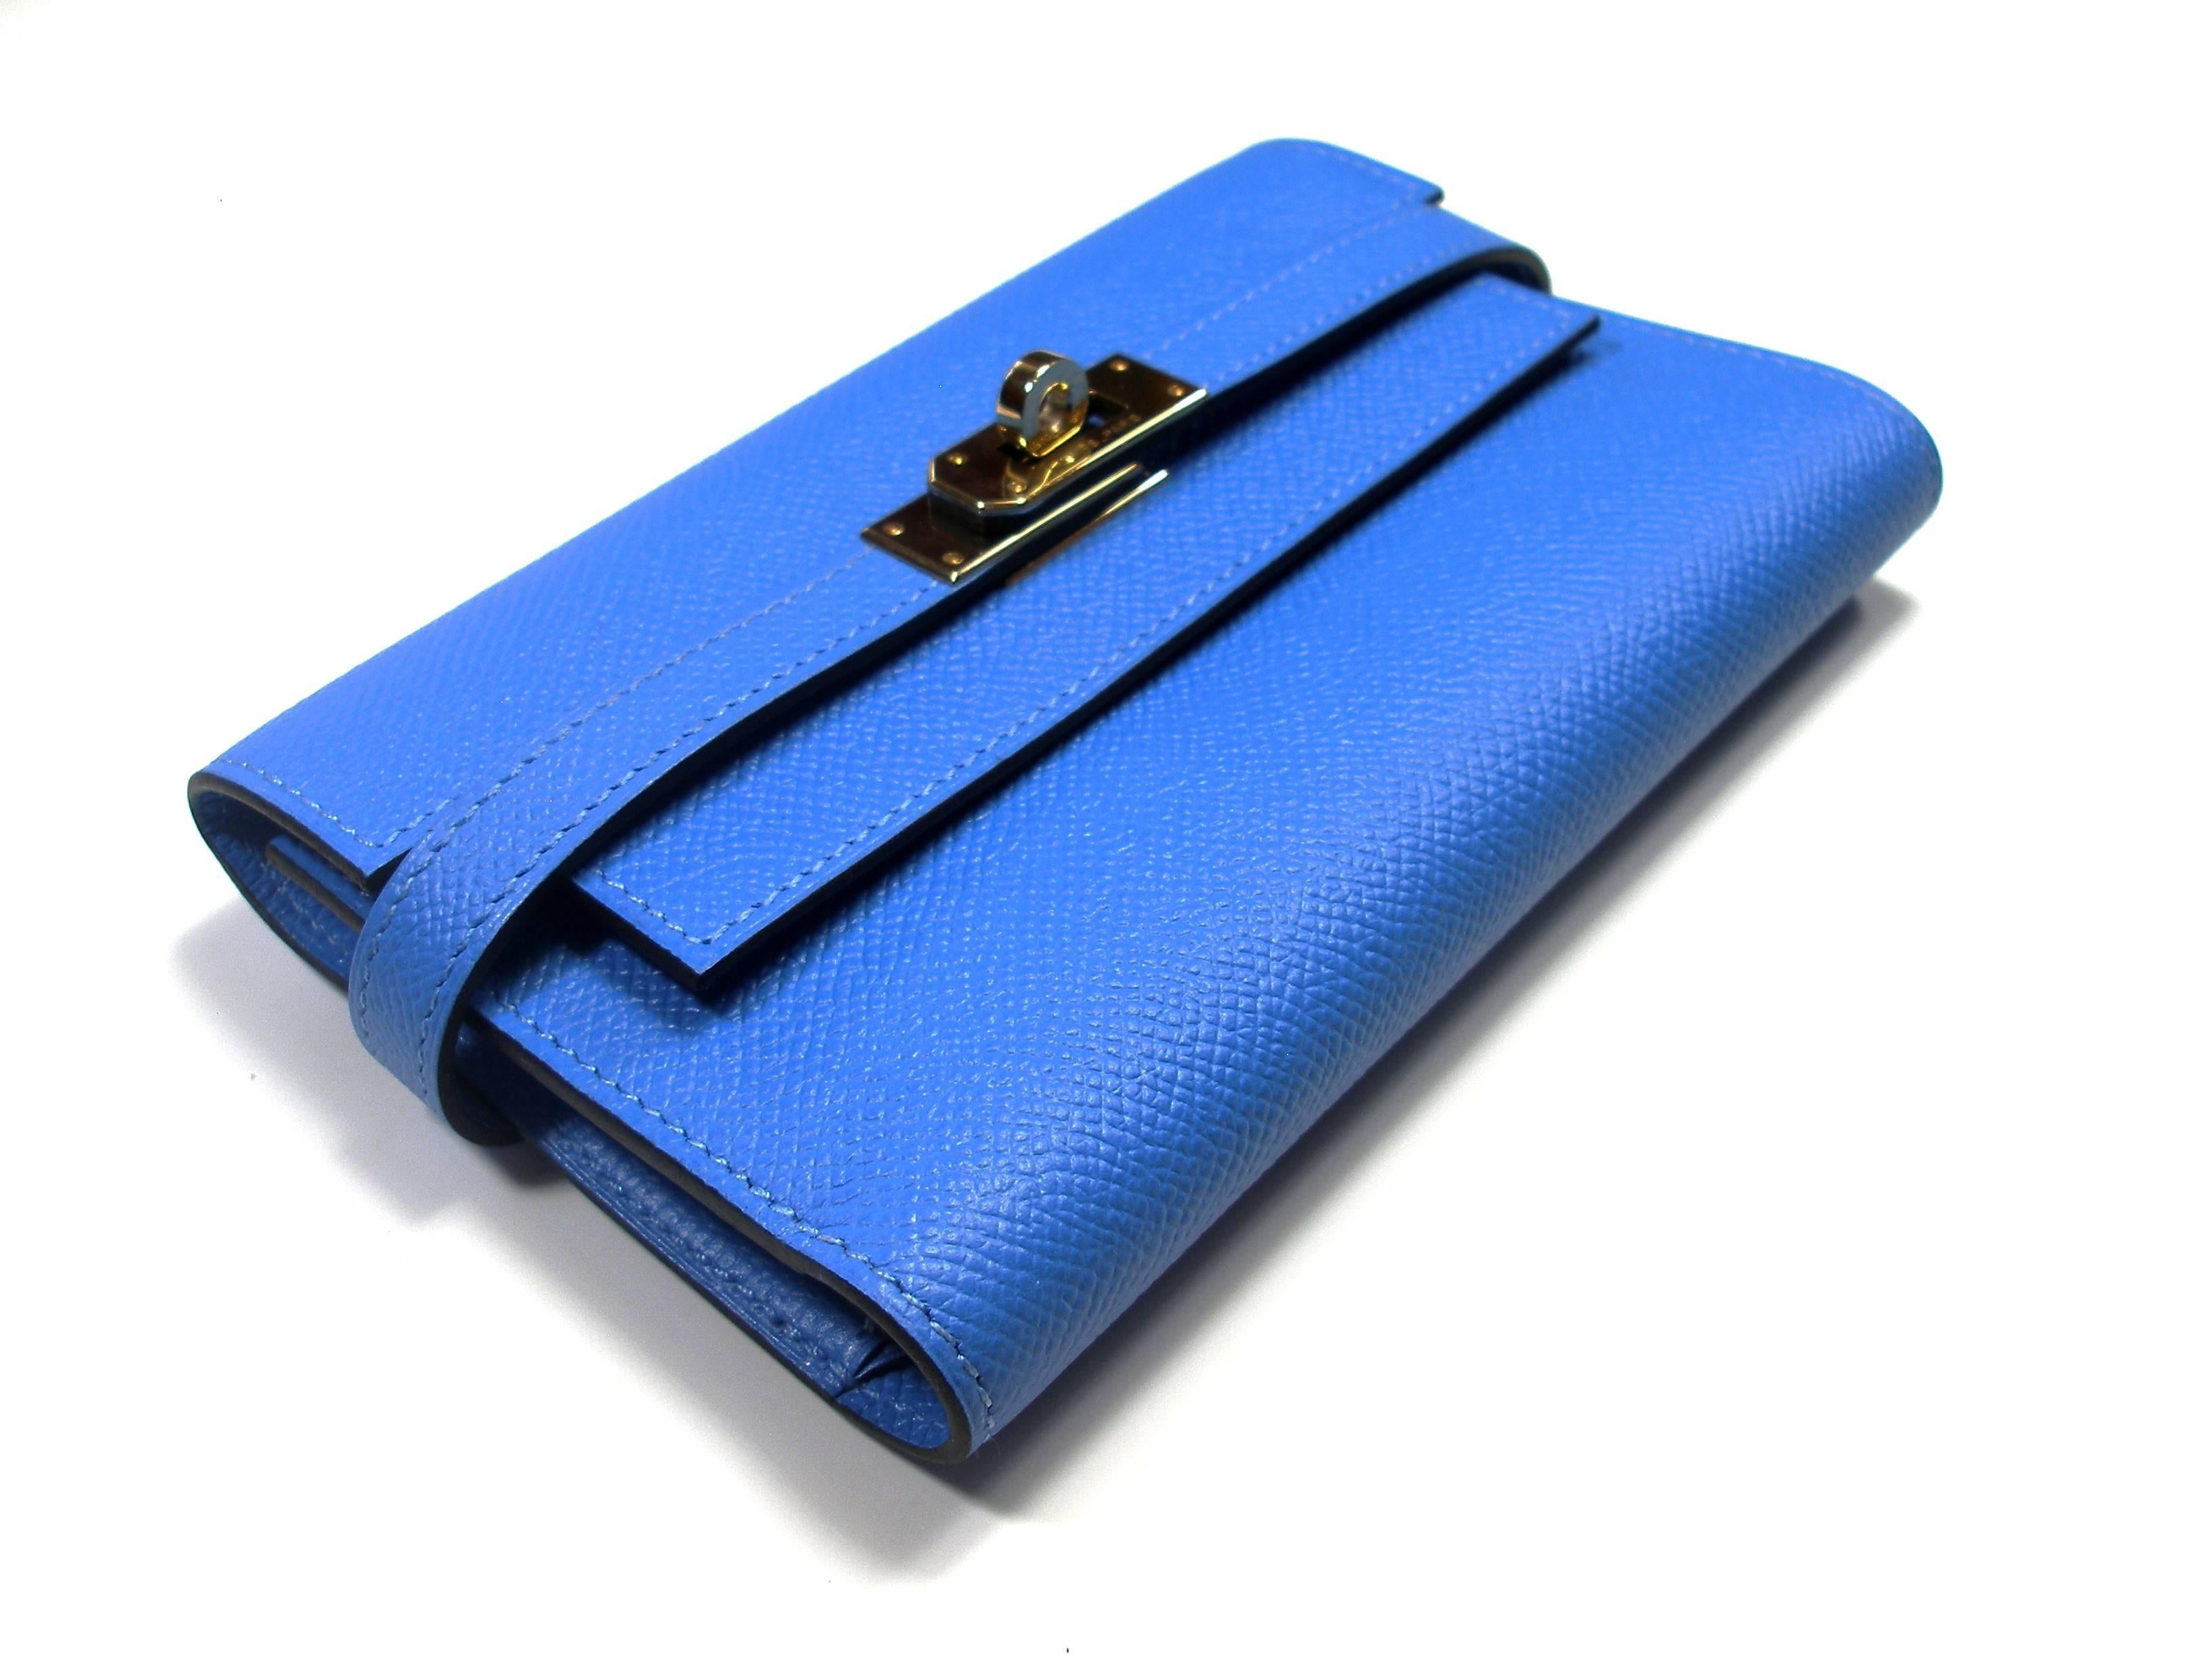 HERMES Chevre Mysore Kelly Compact Wallet Bleu Paradise. This stunning clutch wallet is finely crafted of bright fuchsia chevre goatskin leather. The front flap and polished palladium turn lock open to a matching leather interior with a flap pocket,